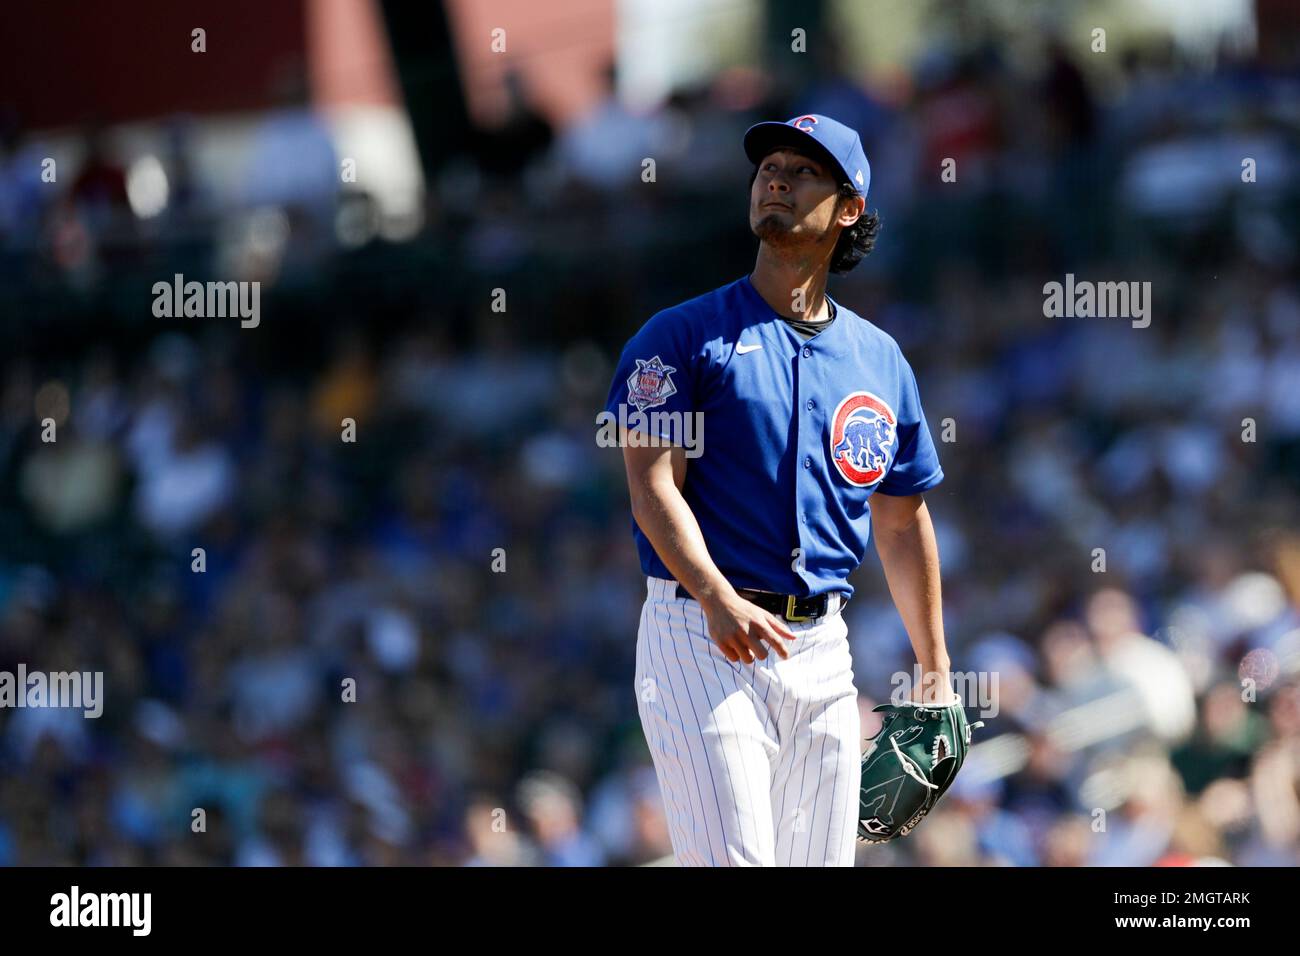 Chicago Cubs starting pitcher Yu Darvish works against a Milwaukee Brewers  batter during the first inning of a spring training baseball game Saturday,  Feb. 29, 2020, in Mesa, Ariz. (AP Photo/Gregory Bull